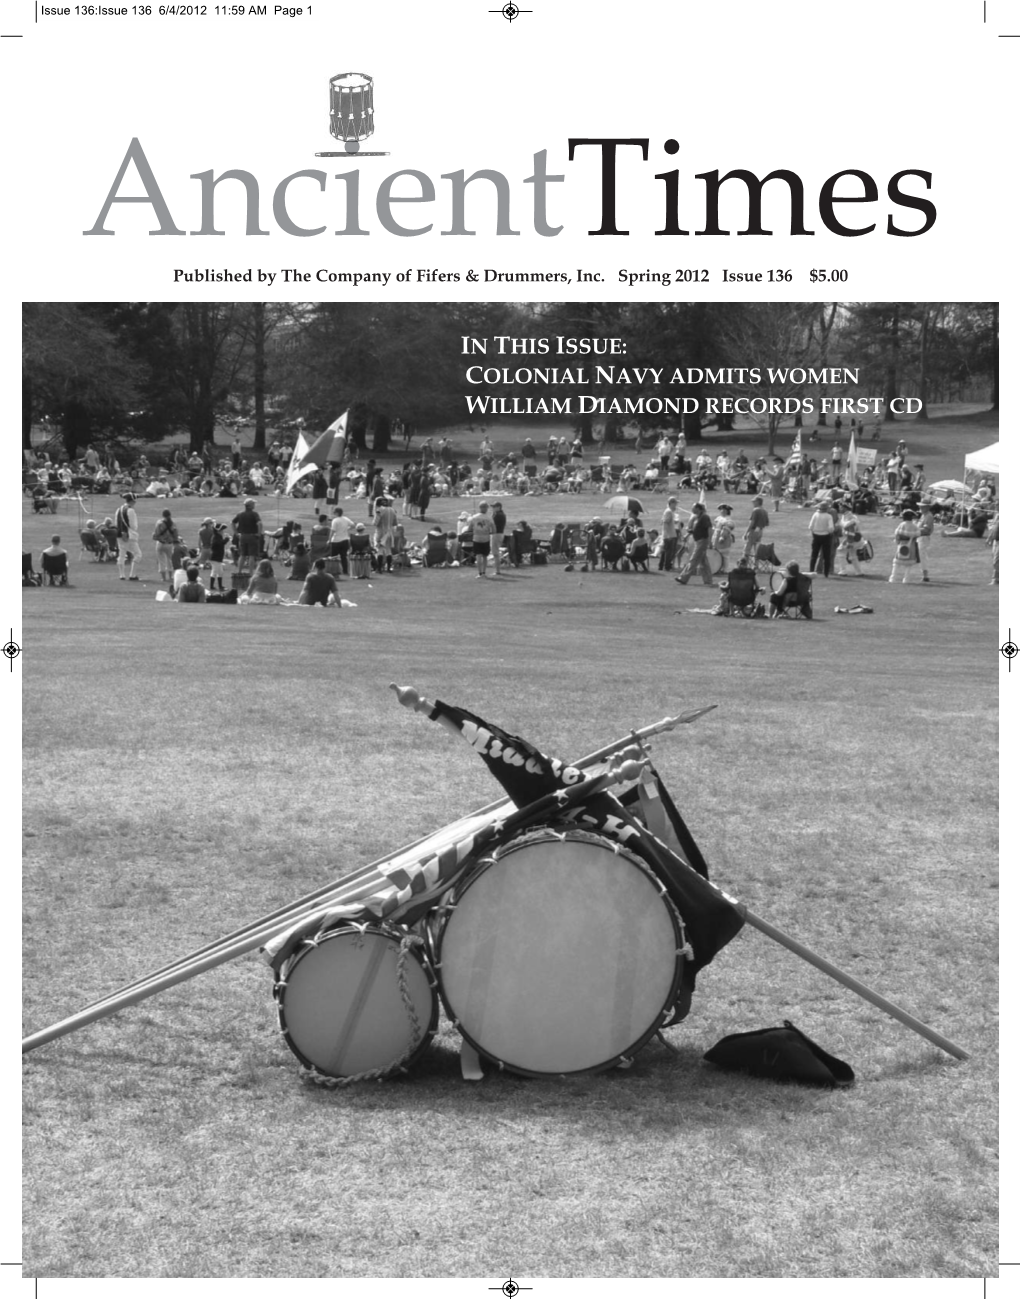 Issue 136:Issue 136 6/4/2012 11:59 AM Page 1 I Ancienttimes Published by the Company of Fifers & Drummers, Inc